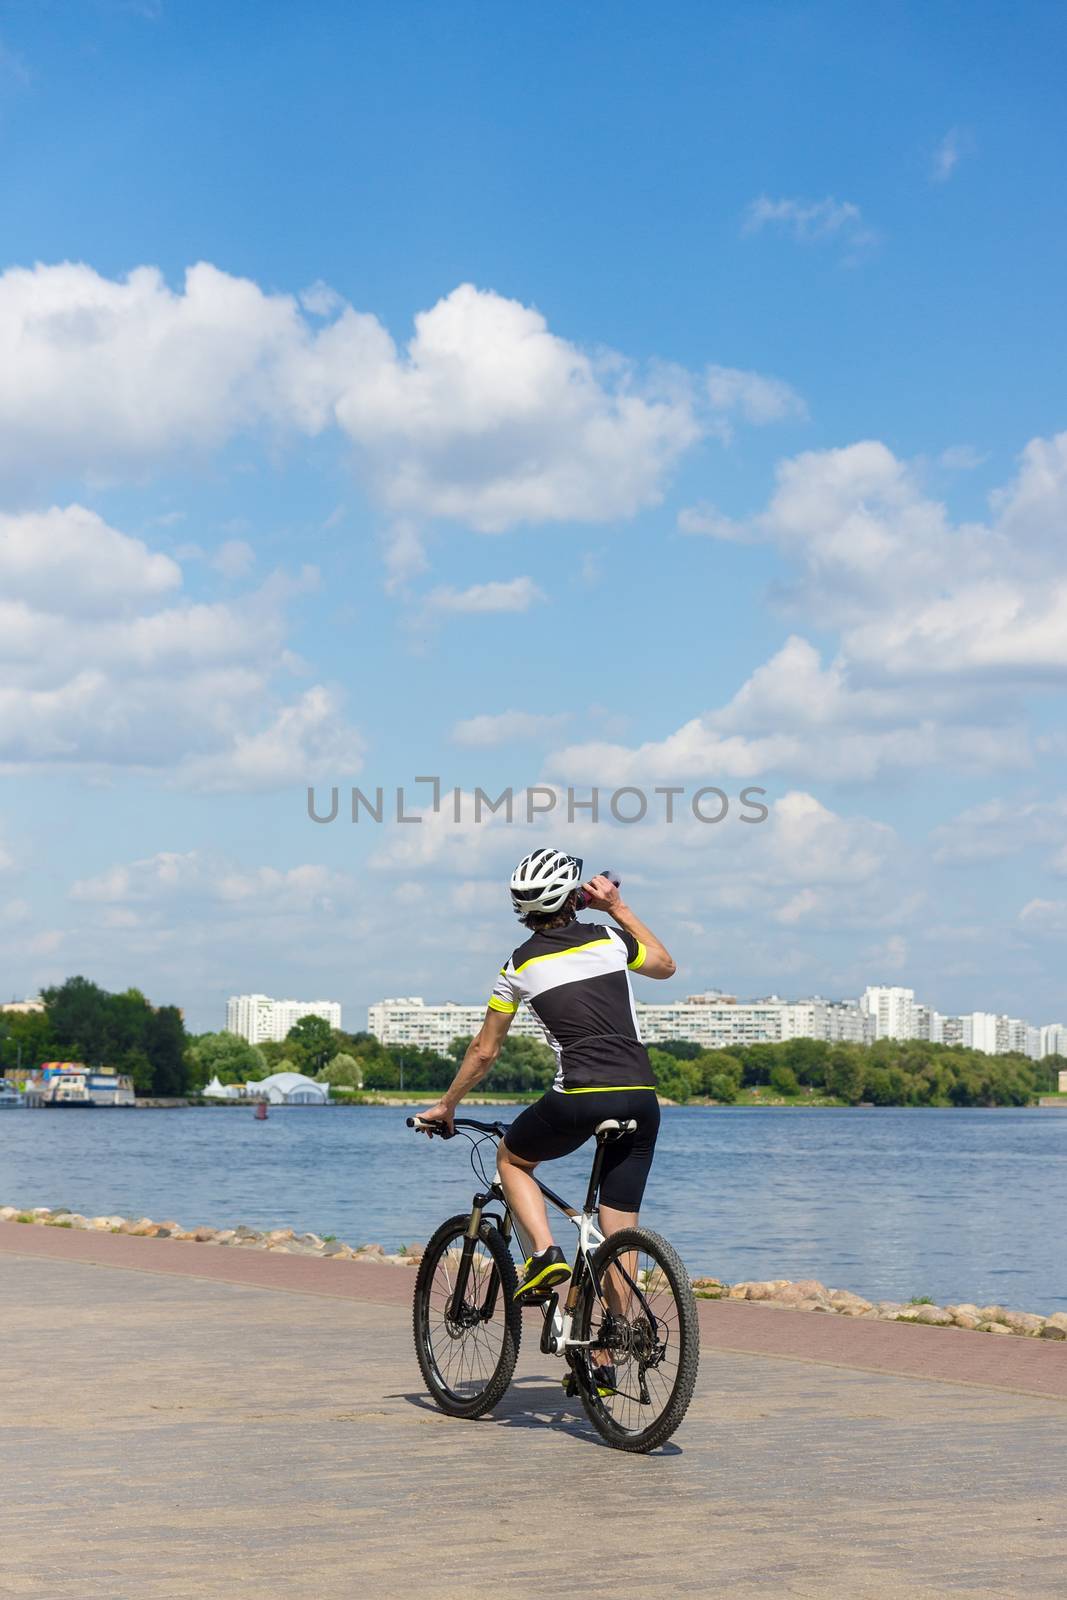 The photo depicts a cyclist racing along the river